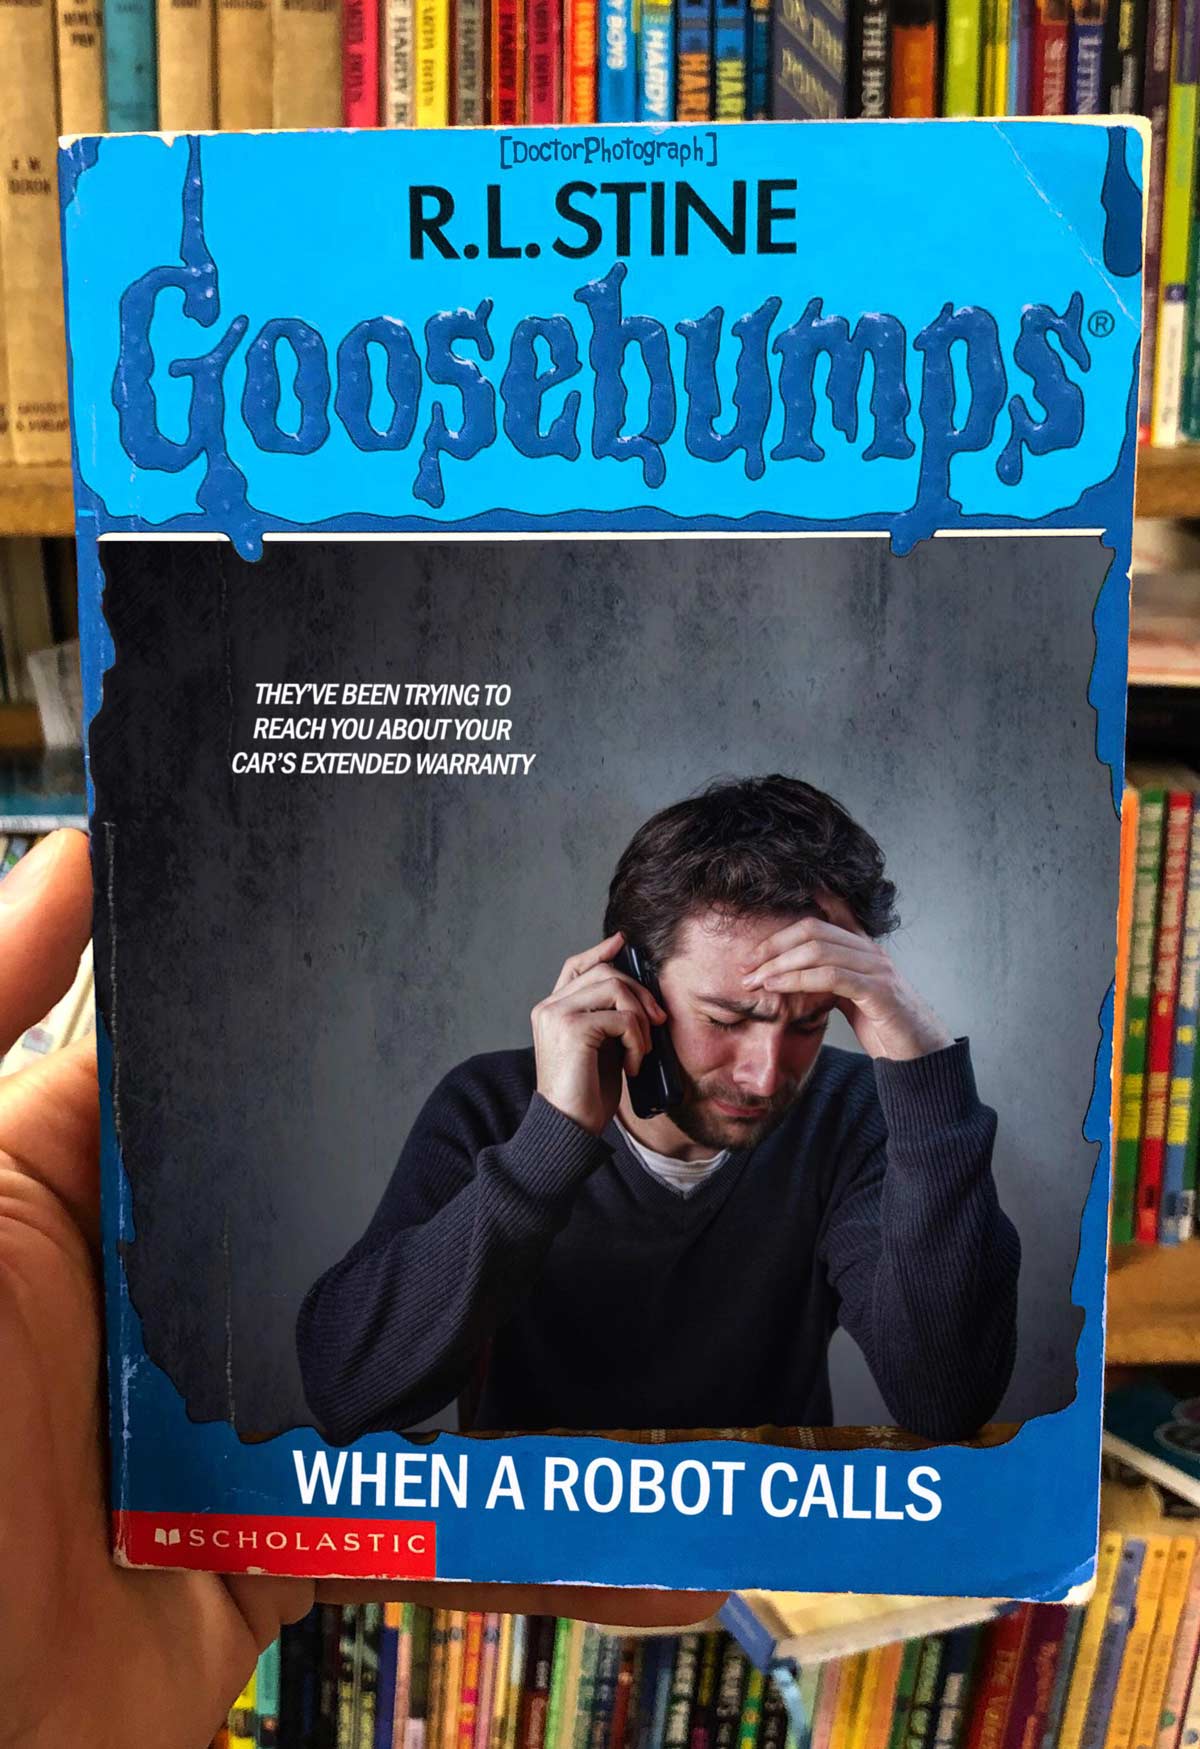 Goosebumps was ahead of its time